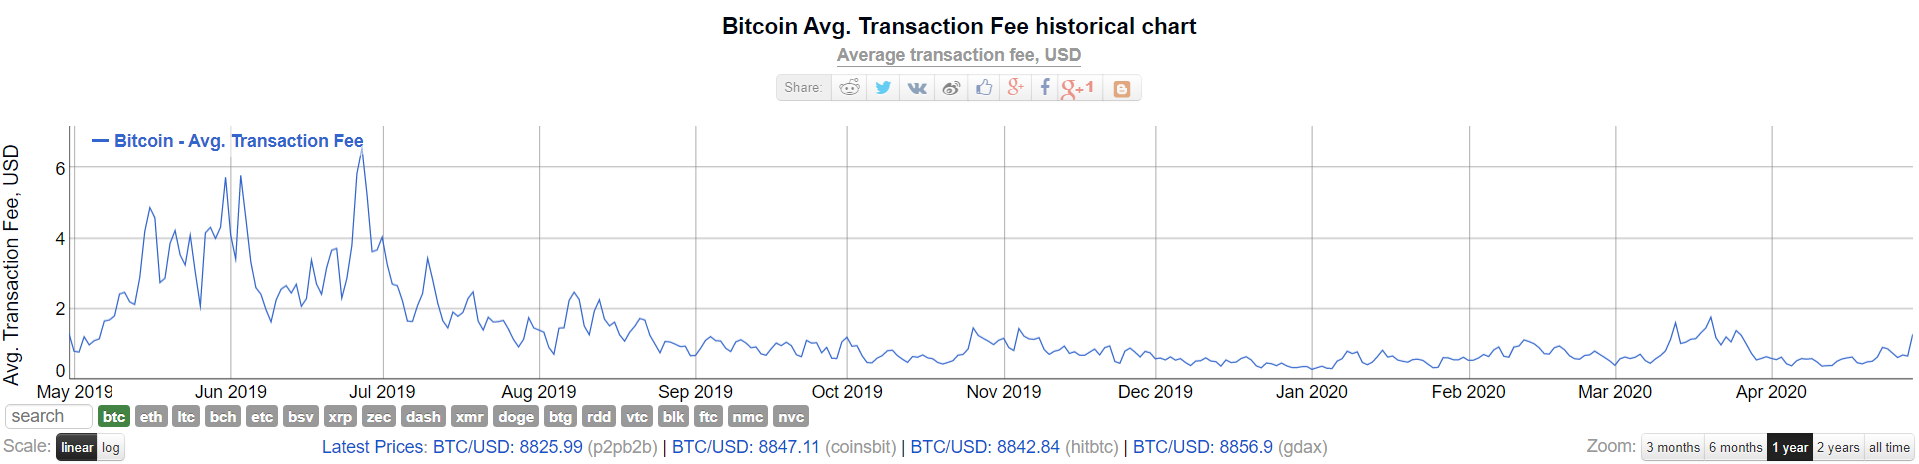 The number of unconfirmed transactions sharply increased in the bitcoin mempool